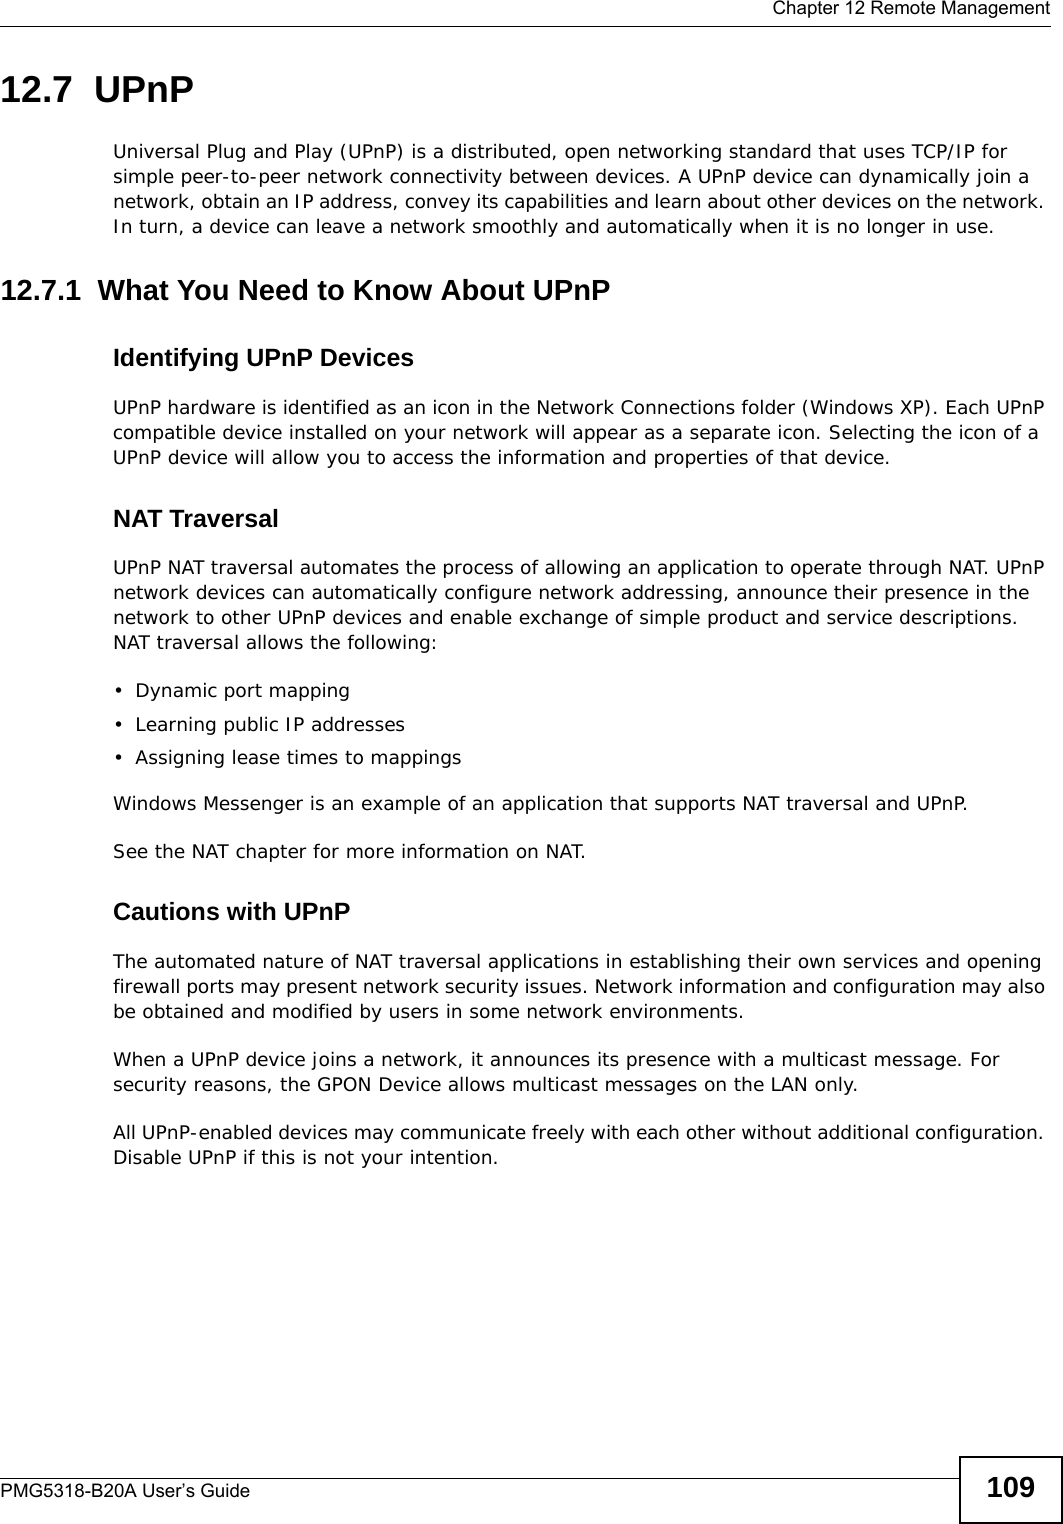  Chapter 12 Remote ManagementPMG5318-B20A User’s Guide 10912.7  UPnP Universal Plug and Play (UPnP) is a distributed, open networking standard that uses TCP/IP for simple peer-to-peer network connectivity between devices. A UPnP device can dynamically join a network, obtain an IP address, convey its capabilities and learn about other devices on the network. In turn, a device can leave a network smoothly and automatically when it is no longer in use.12.7.1  What You Need to Know About UPnPIdentifying UPnP DevicesUPnP hardware is identified as an icon in the Network Connections folder (Windows XP). Each UPnP compatible device installed on your network will appear as a separate icon. Selecting the icon of a UPnP device will allow you to access the information and properties of that device. NAT TraversalUPnP NAT traversal automates the process of allowing an application to operate through NAT. UPnP network devices can automatically configure network addressing, announce their presence in the network to other UPnP devices and enable exchange of simple product and service descriptions. NAT traversal allows the following:• Dynamic port mapping• Learning public IP addresses• Assigning lease times to mappingsWindows Messenger is an example of an application that supports NAT traversal and UPnP. See the NAT chapter for more information on NAT.Cautions with UPnPThe automated nature of NAT traversal applications in establishing their own services and opening firewall ports may present network security issues. Network information and configuration may also be obtained and modified by users in some network environments. When a UPnP device joins a network, it announces its presence with a multicast message. For security reasons, the GPON Device allows multicast messages on the LAN only.All UPnP-enabled devices may communicate freely with each other without additional configuration. Disable UPnP if this is not your intention. 